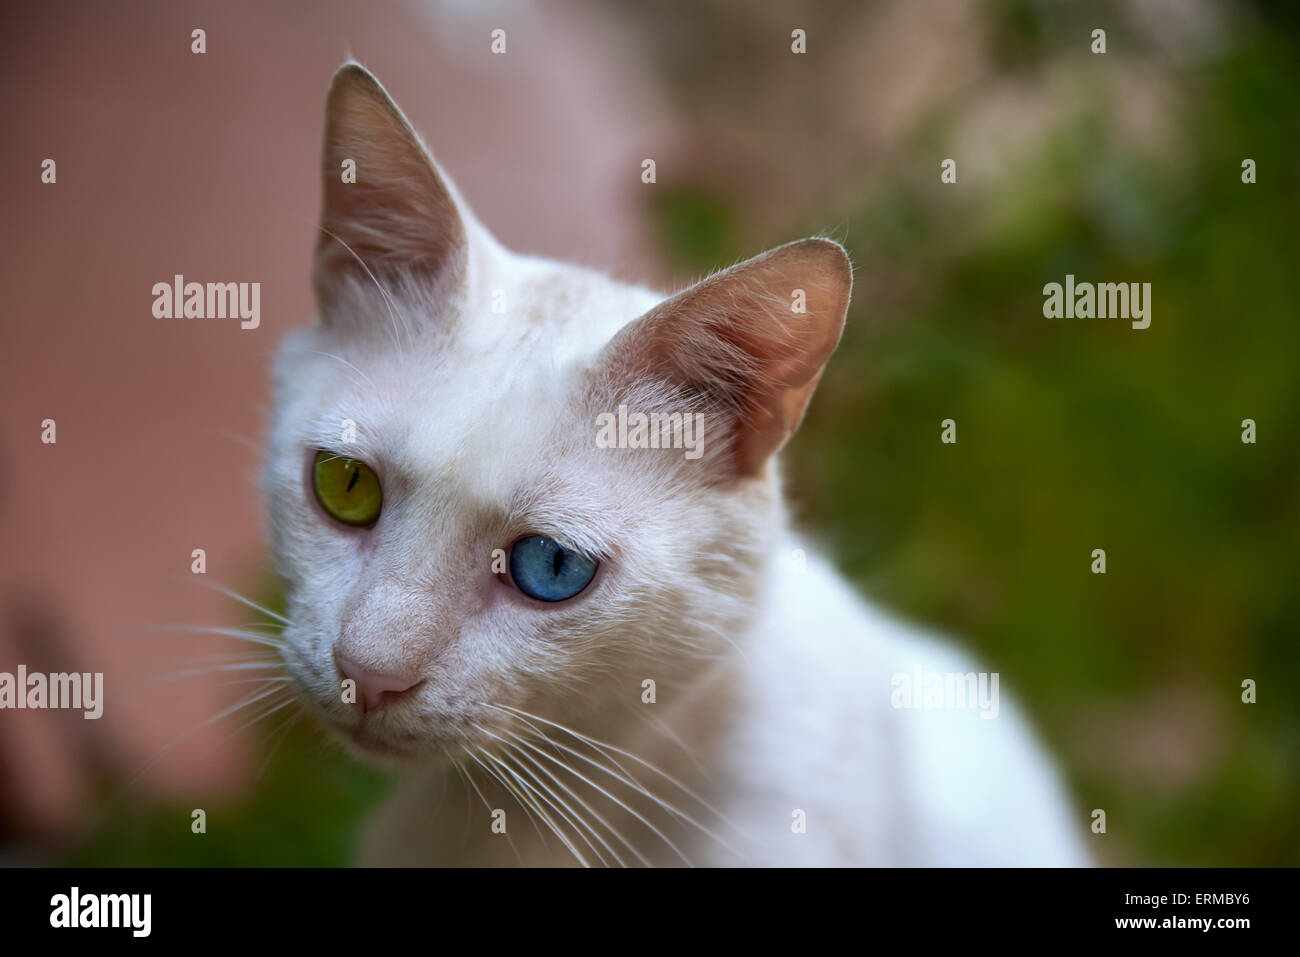 White cat with blue and green eyes close-up Stock Photo